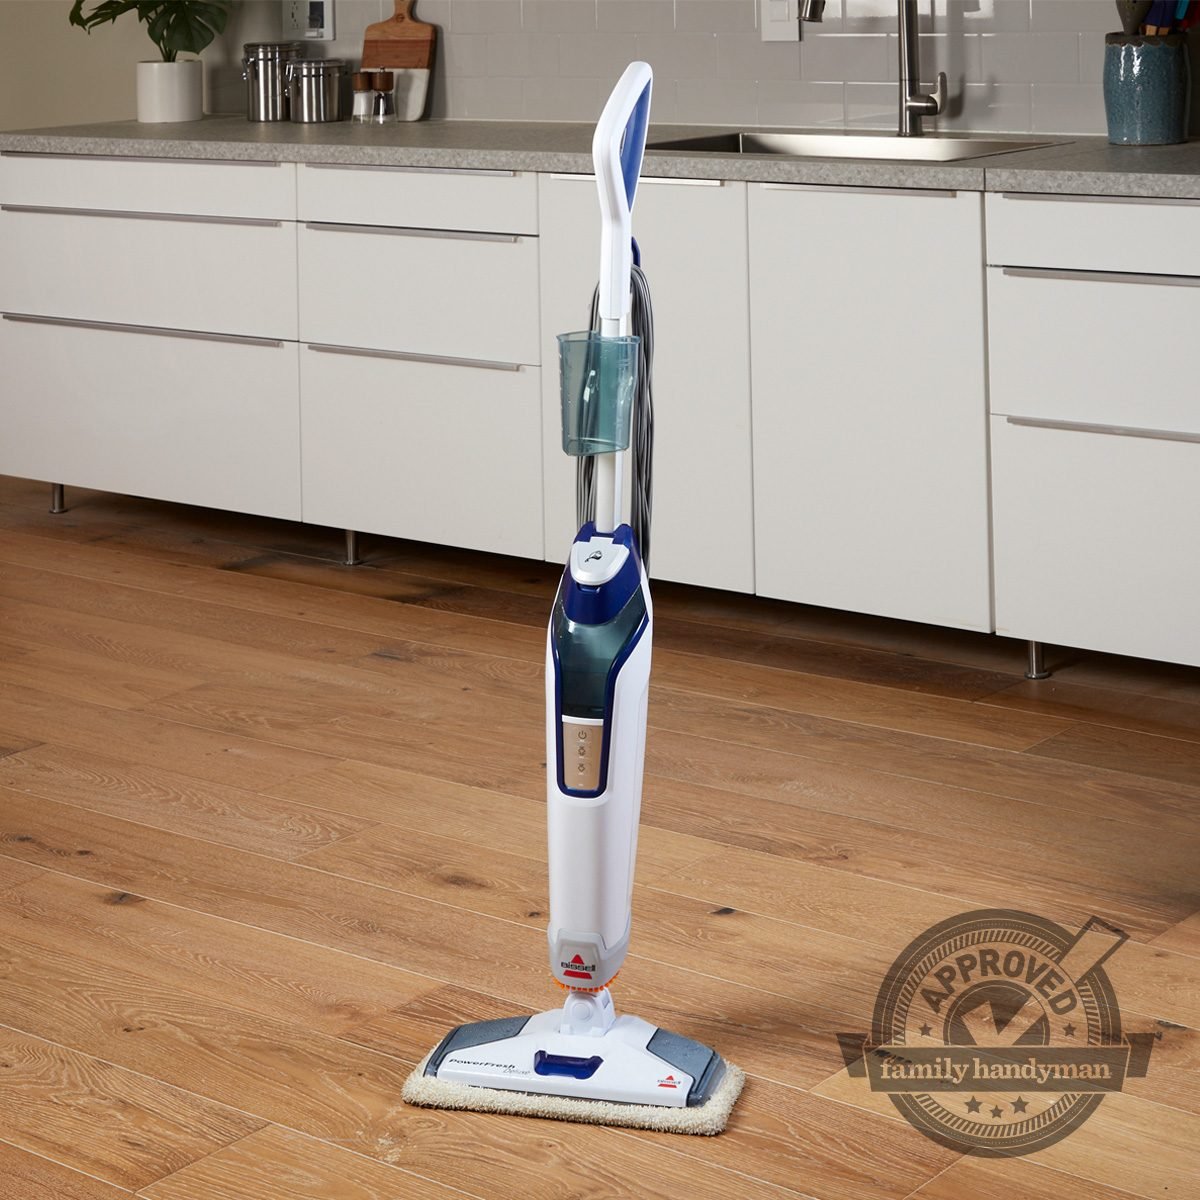 Effortless Cleaning with the Bissell PowerFresh Steam Mop – Family Handyman Approved!